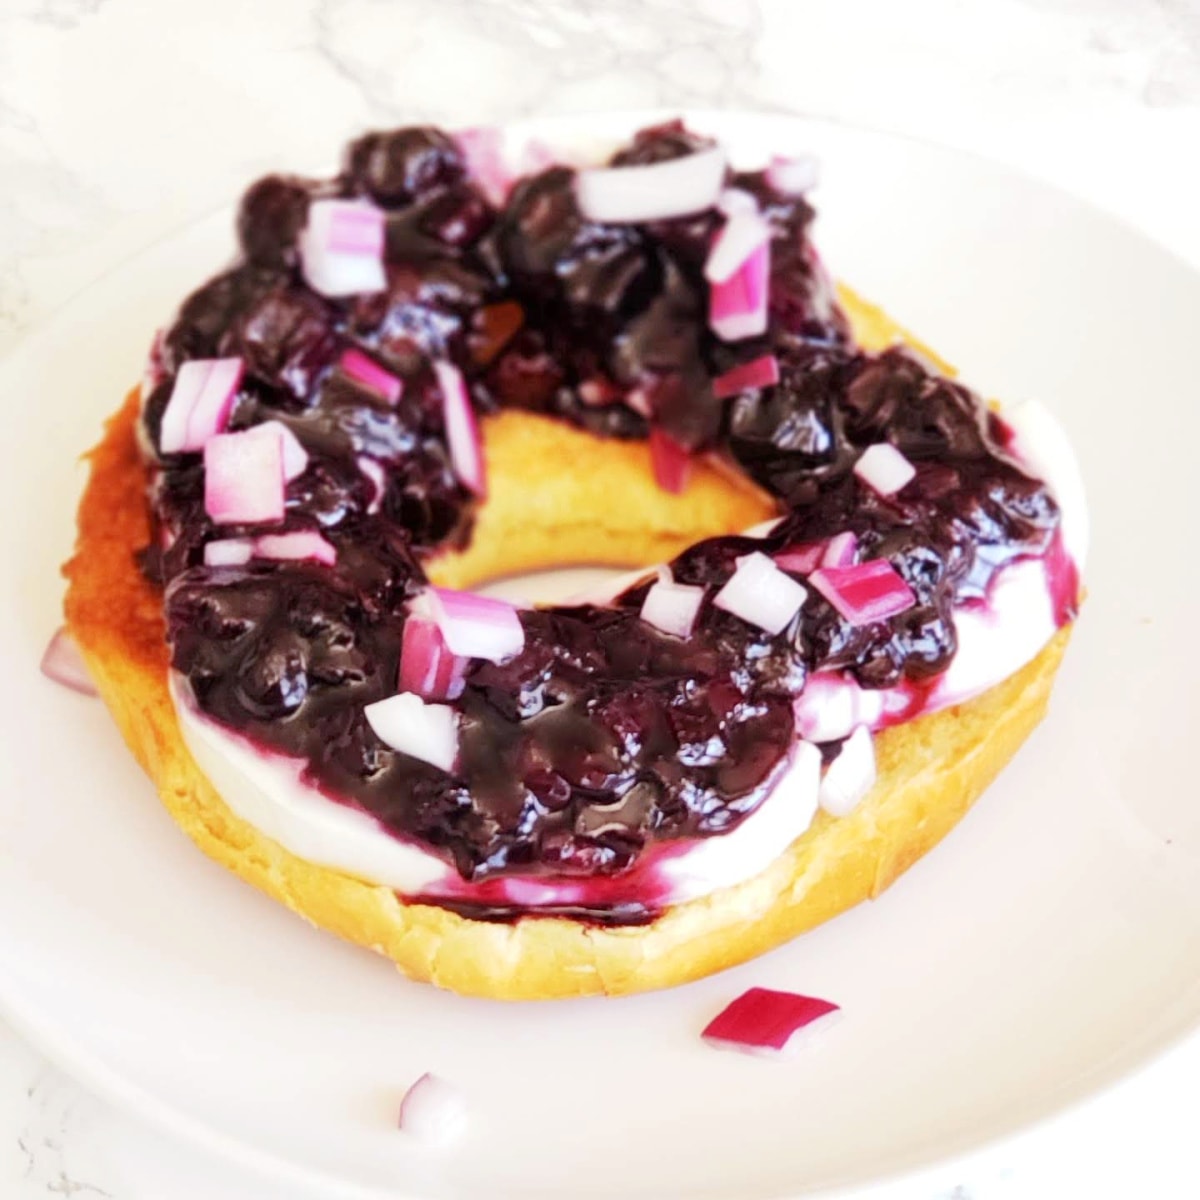 Blueberry Hatch Chile Chutney with chopped purple onions garnishing, on top of a toasted bagel half on a white plate with white marble countertop